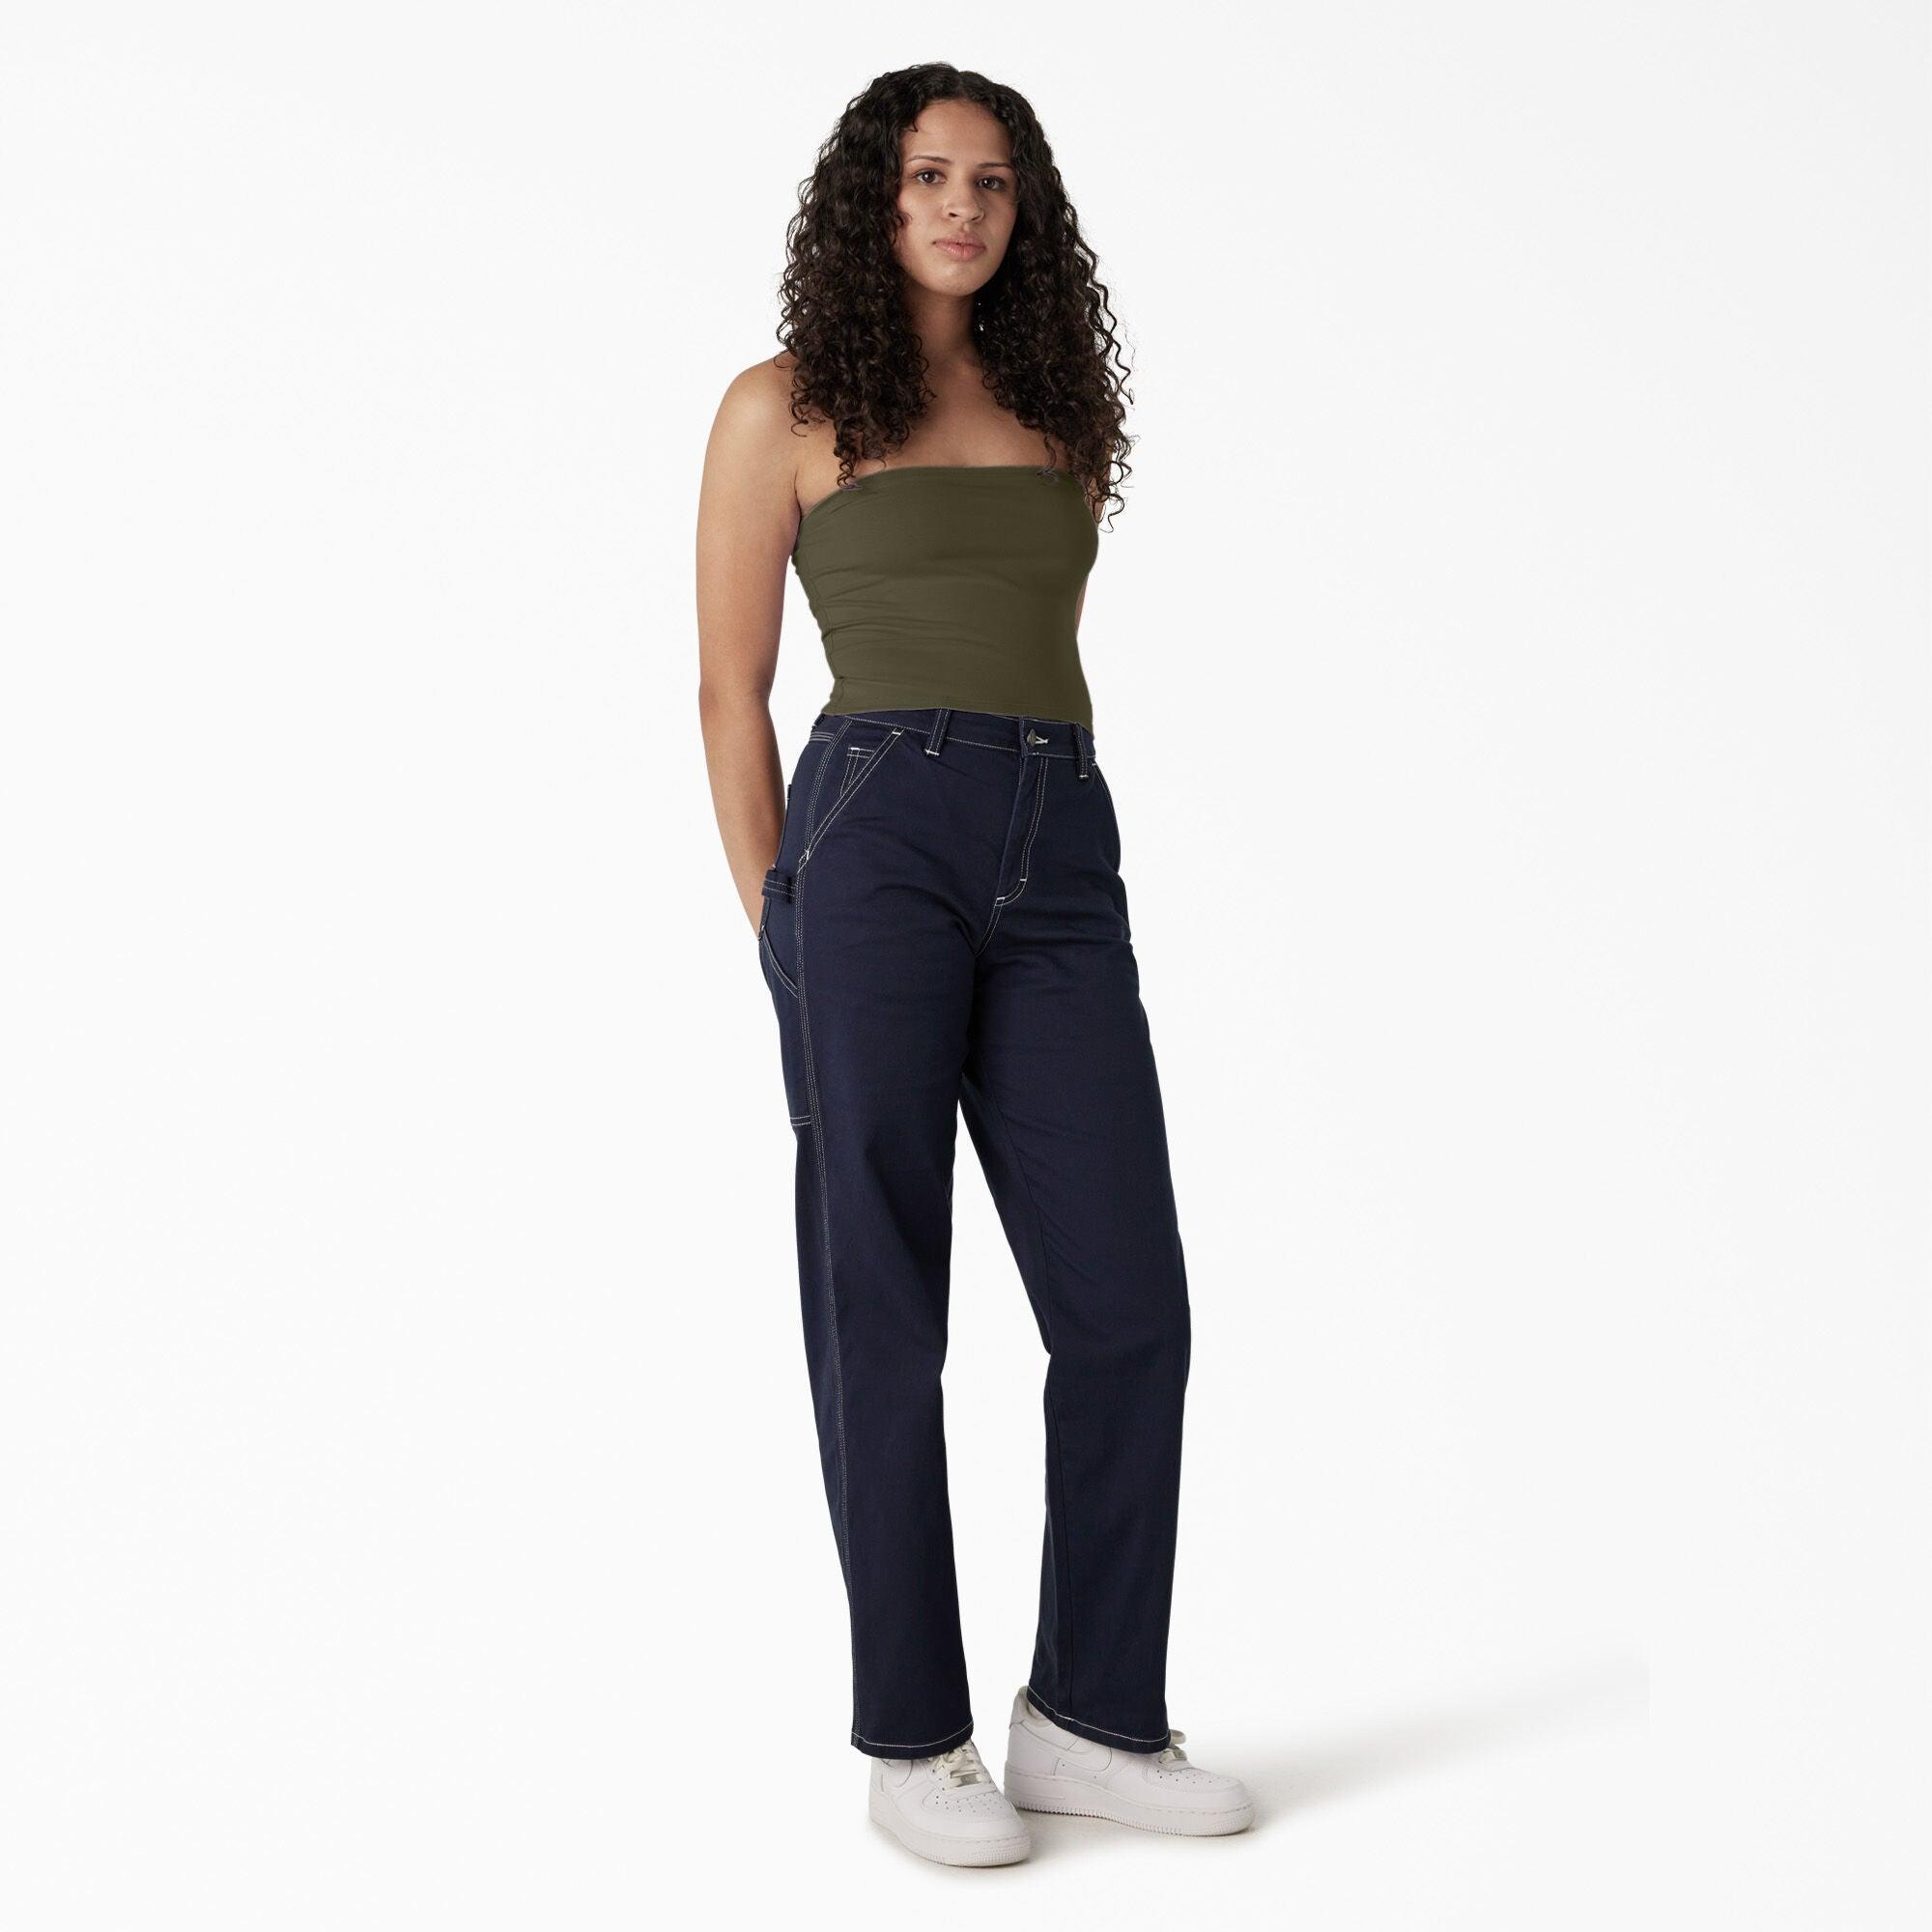 Women's Knit Tube Top, Military Green - Purpose-Built / Home of the Trades